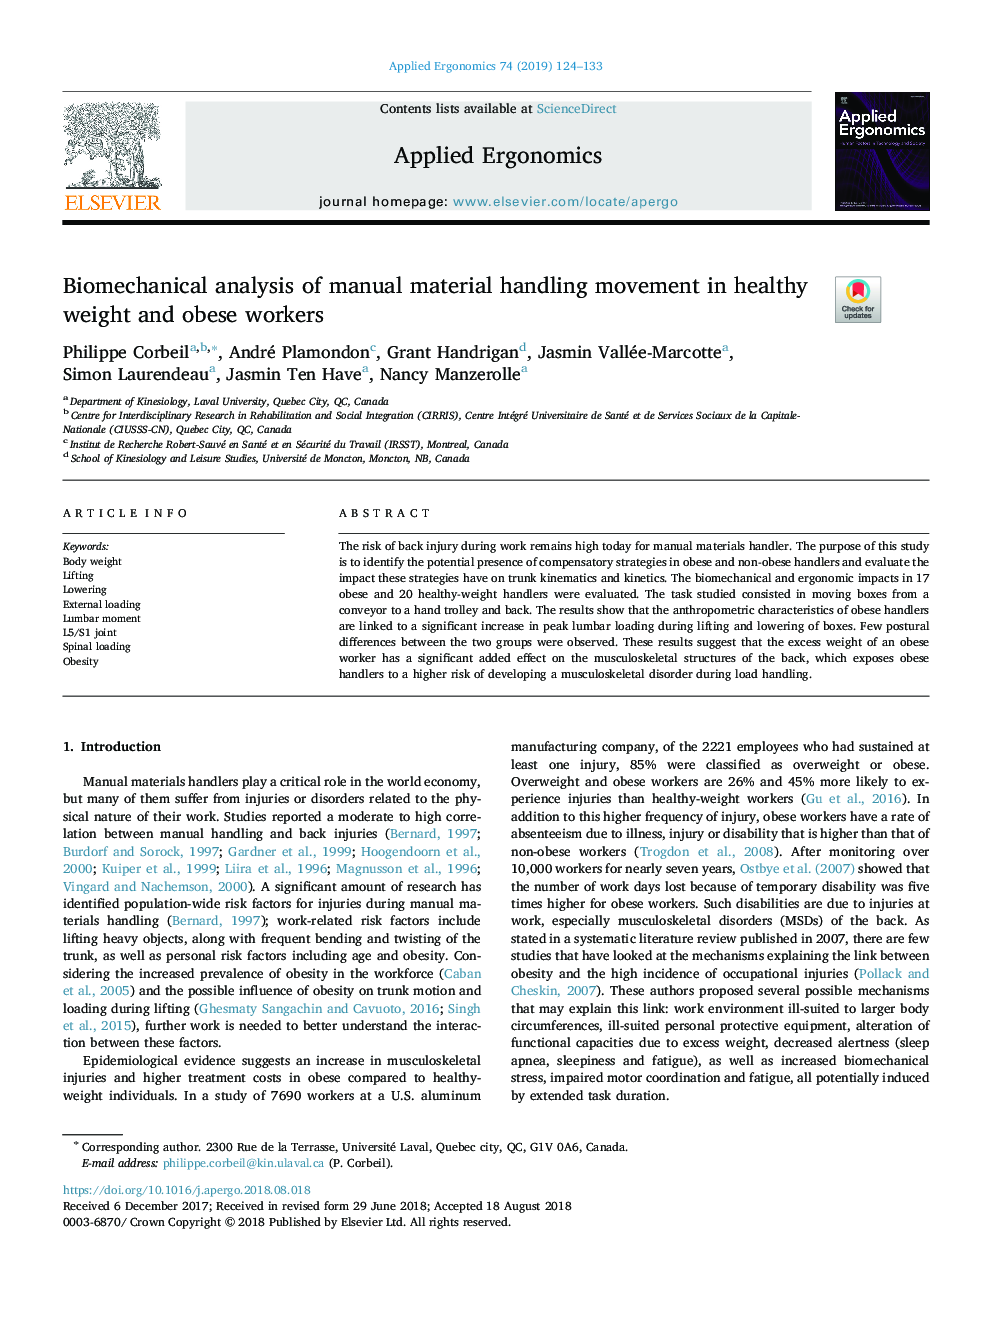 Biomechanical analysis of manual material handling movement in healthy weight and obese workers